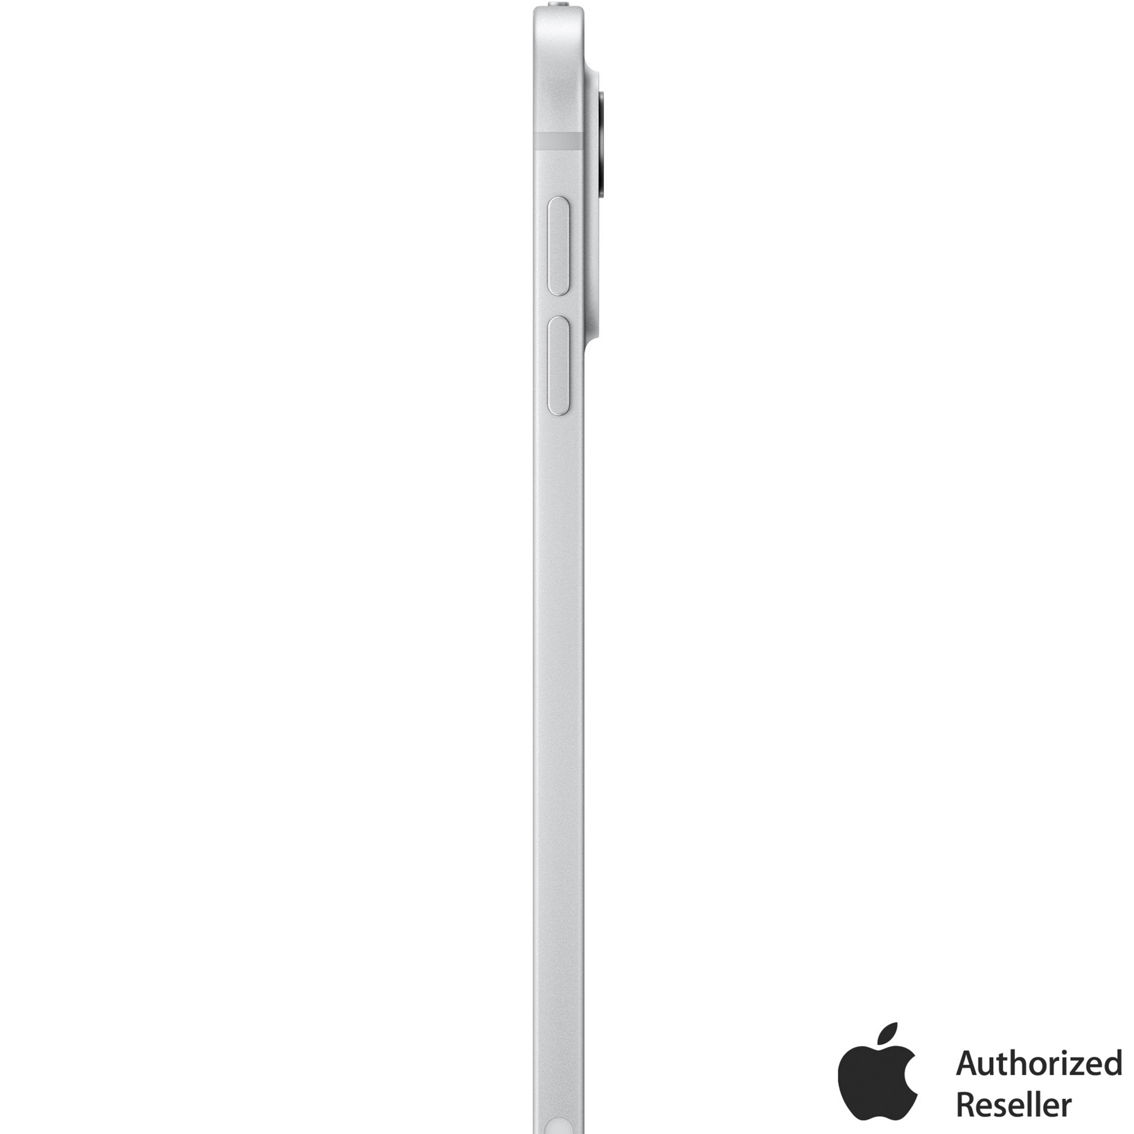 Apple 11 in. iPad Pro Wi-Fi 512GB with Standard Glass - Image 2 of 8